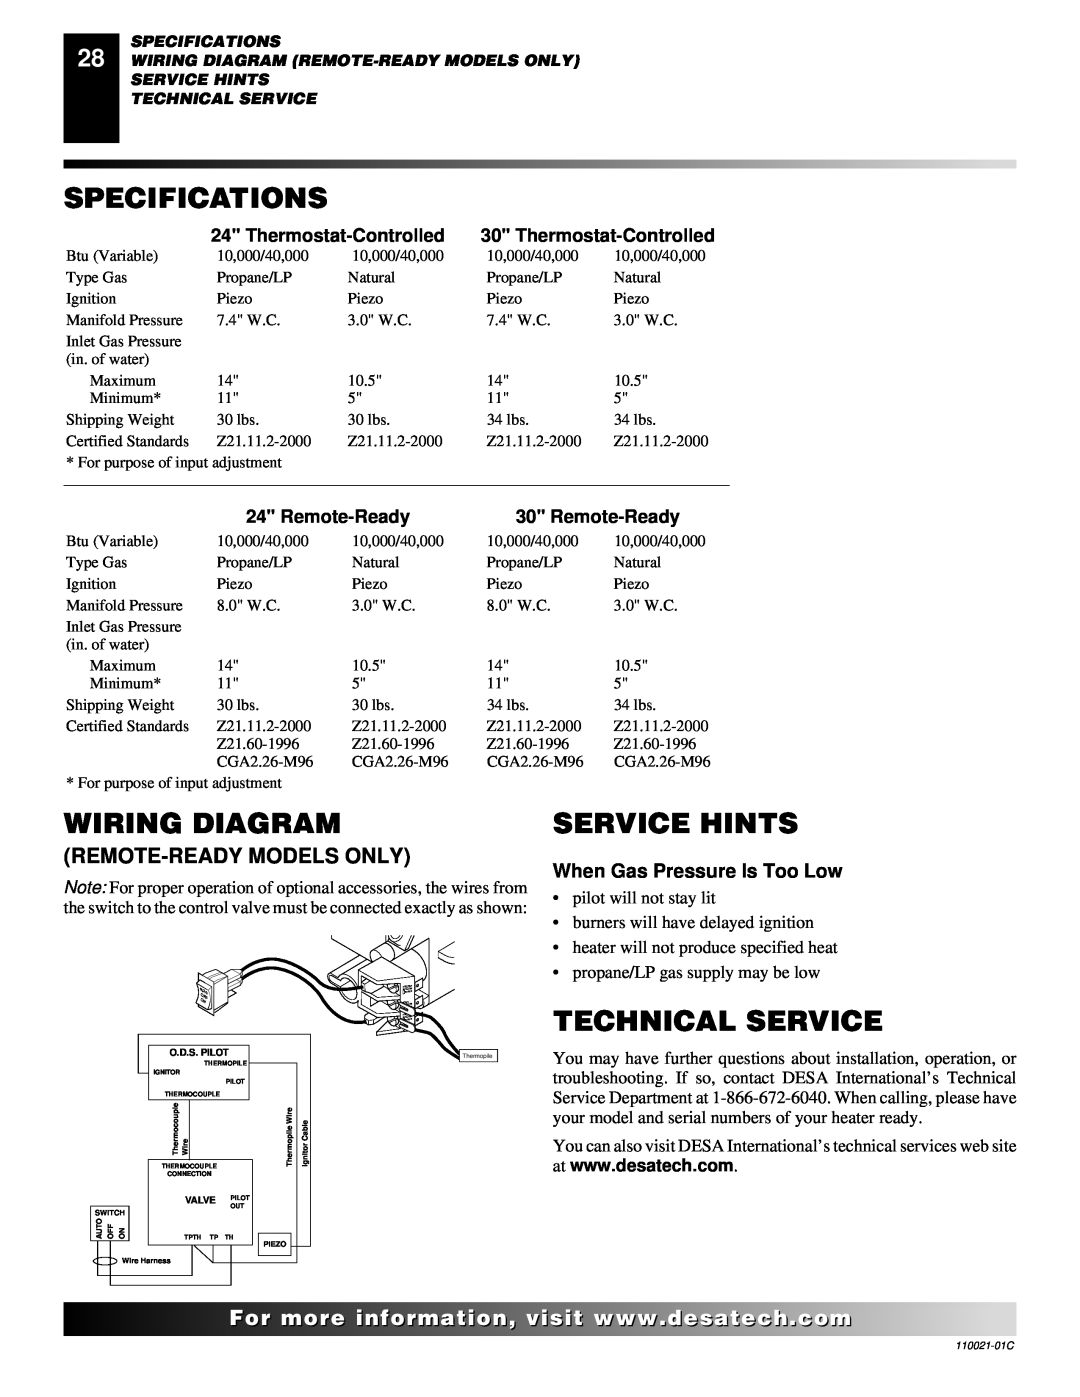 Desa CTB3924NT, RL24NR Specifications, Wiring Diagram, Service Hints, Technical Service, When Gas Pressure Is Too Low 